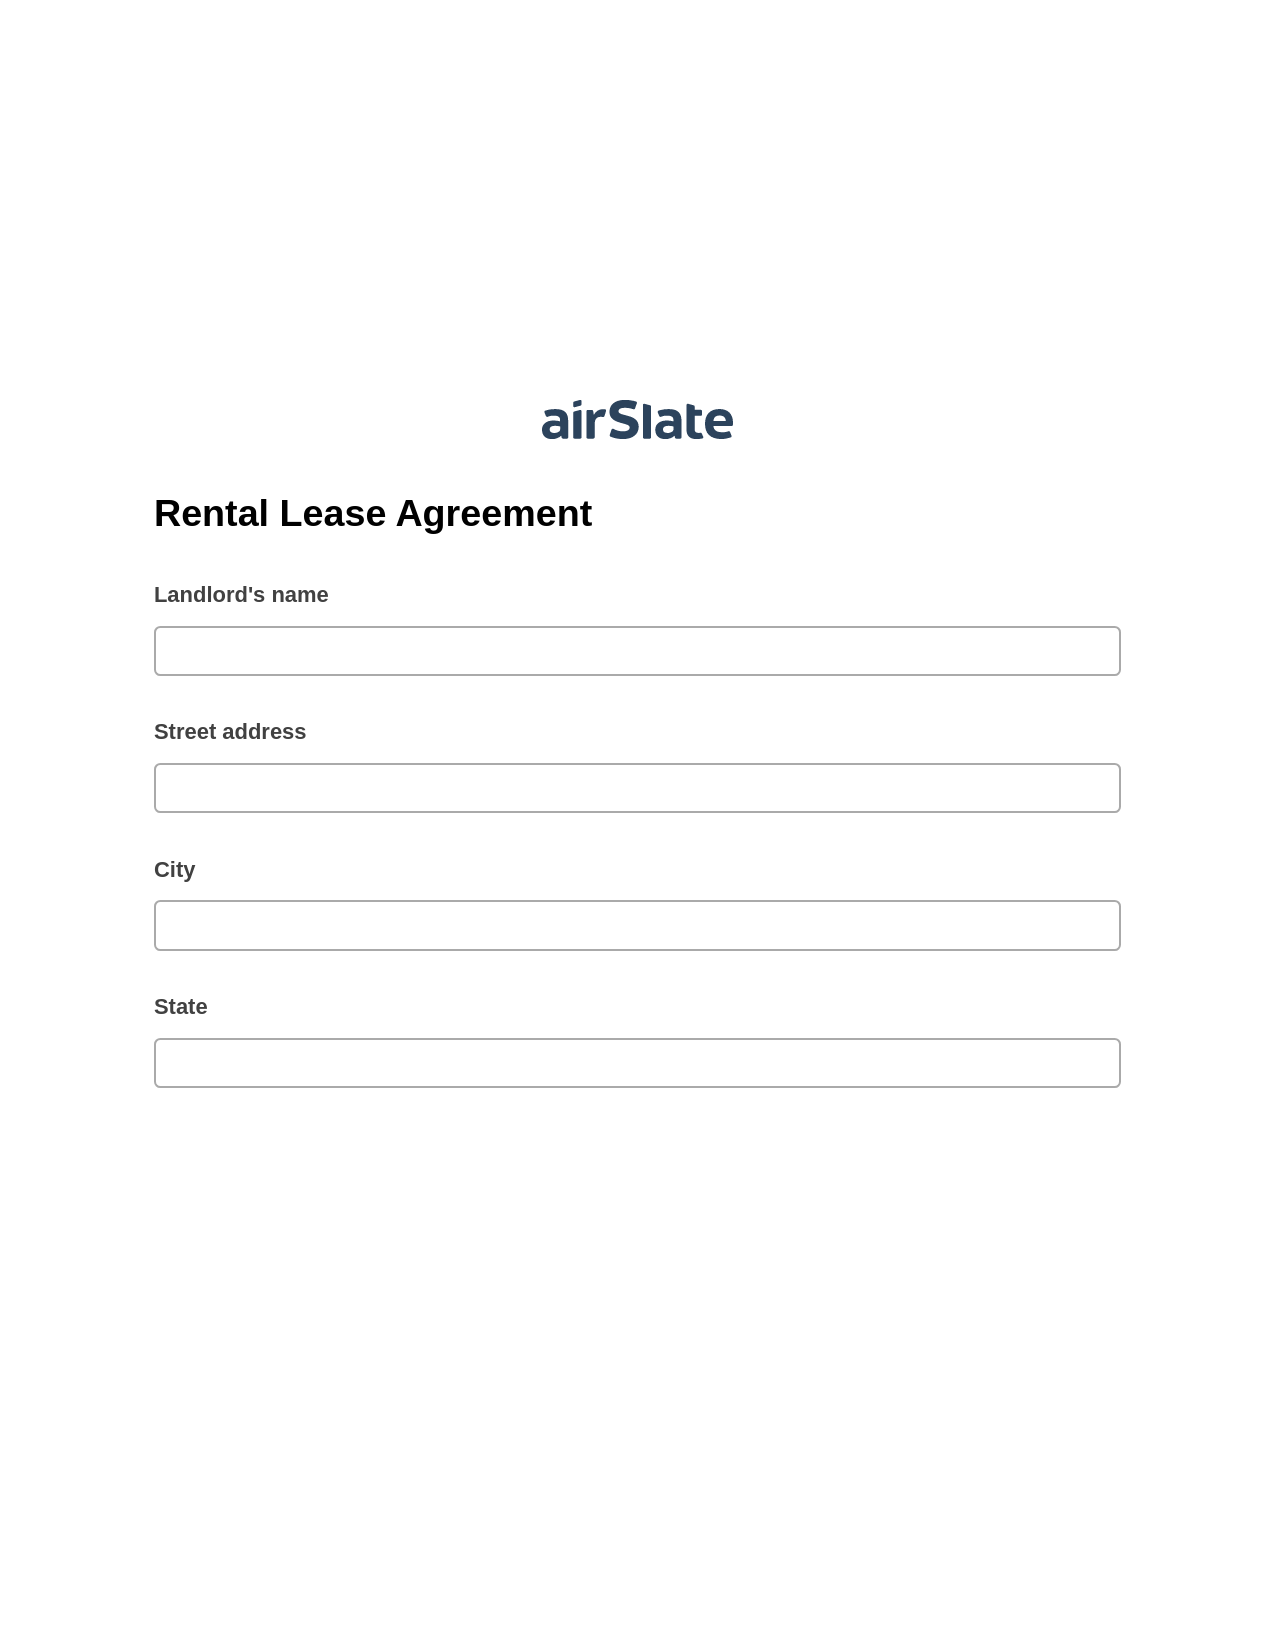 Multirole Rental Lease Agreement Pre-fill from Excel Spreadsheet Dropdown Options Bot, Create slate bot, Export to MySQL Bot